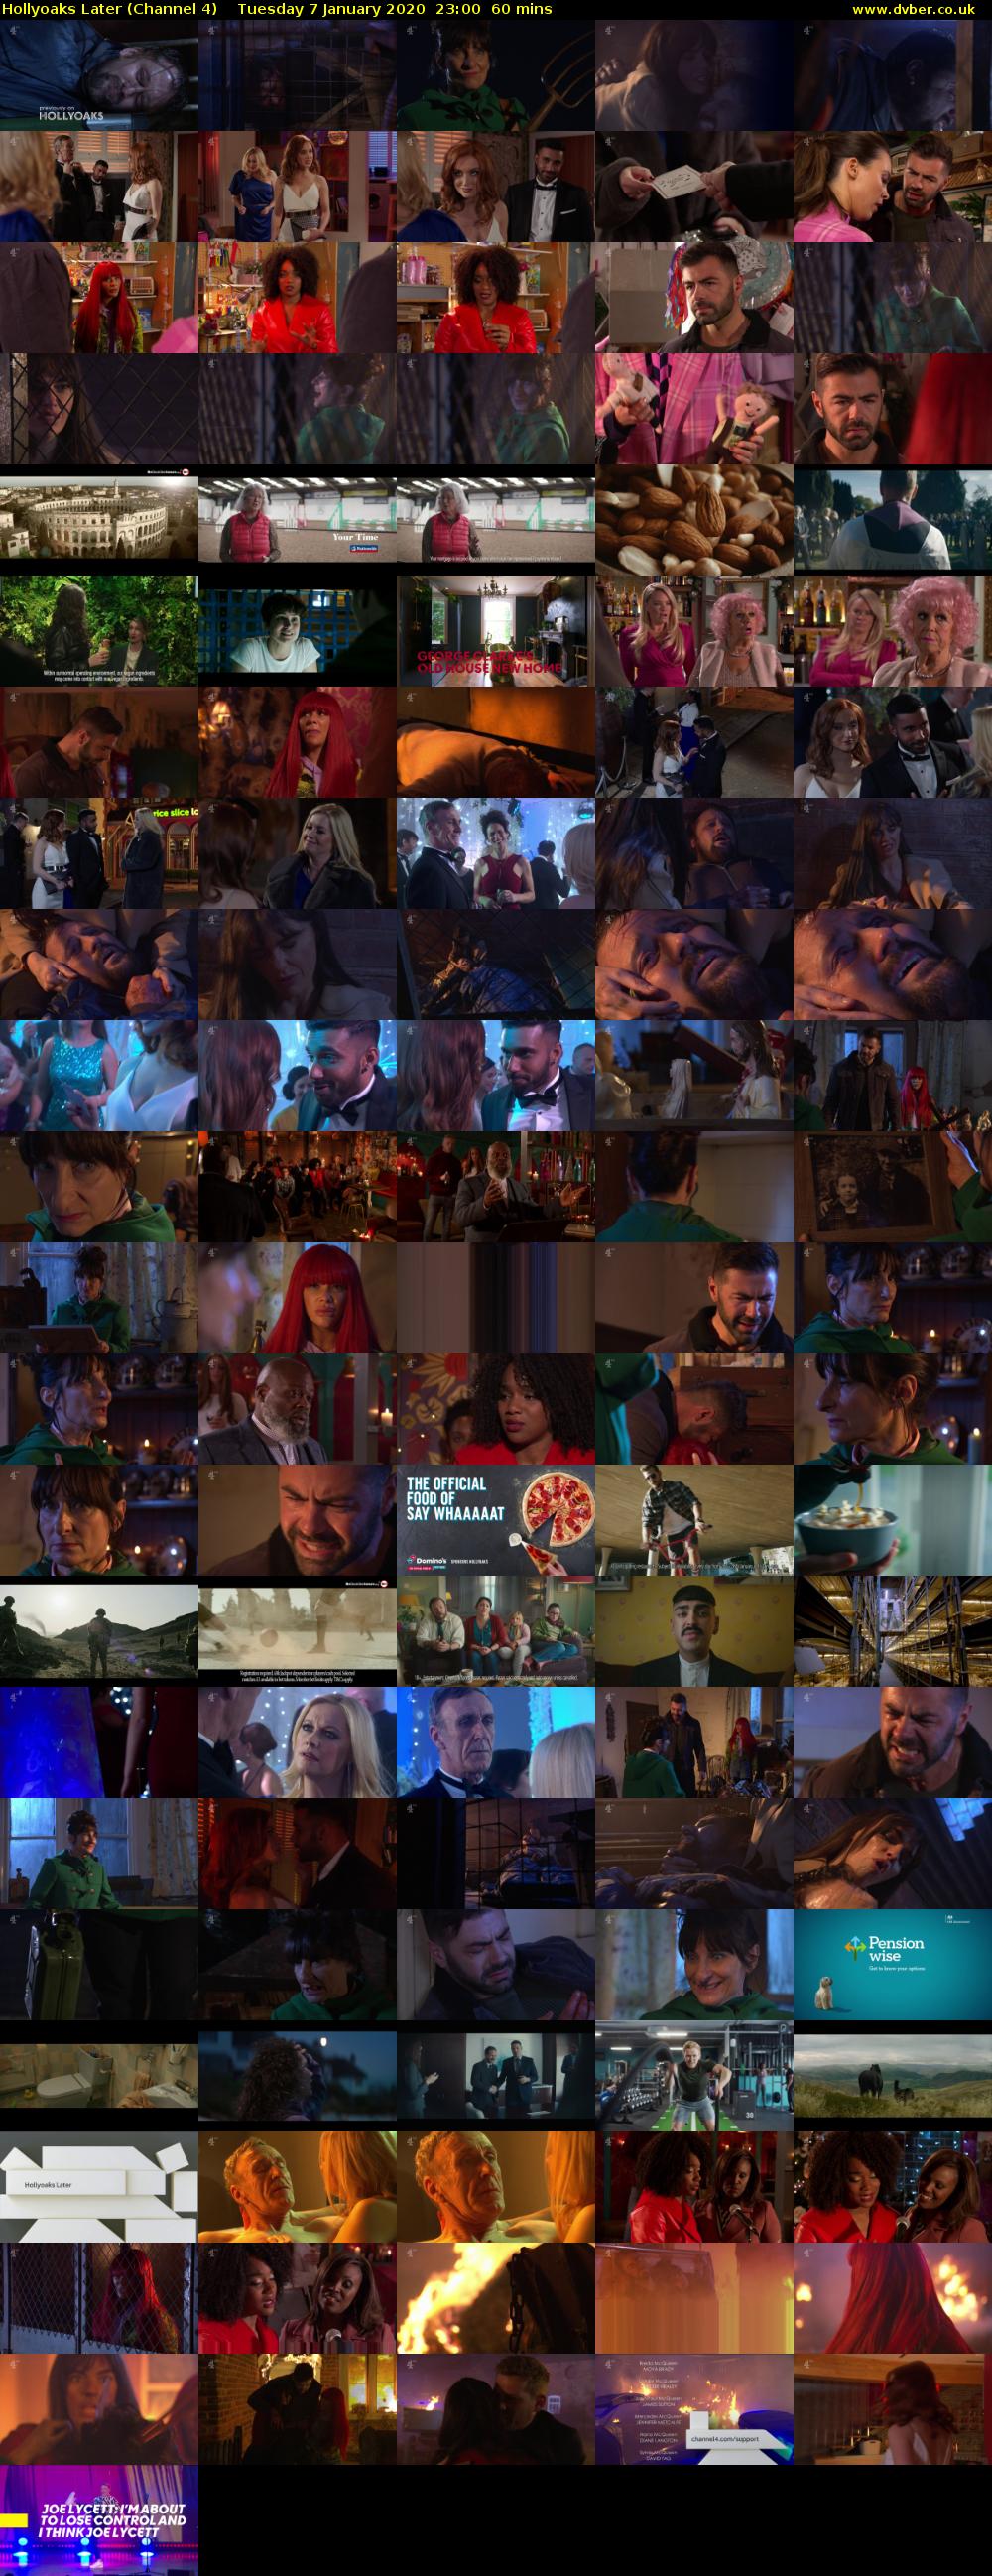 Hollyoaks Later (Channel 4) Tuesday 7 January 2020 23:00 - 00:00